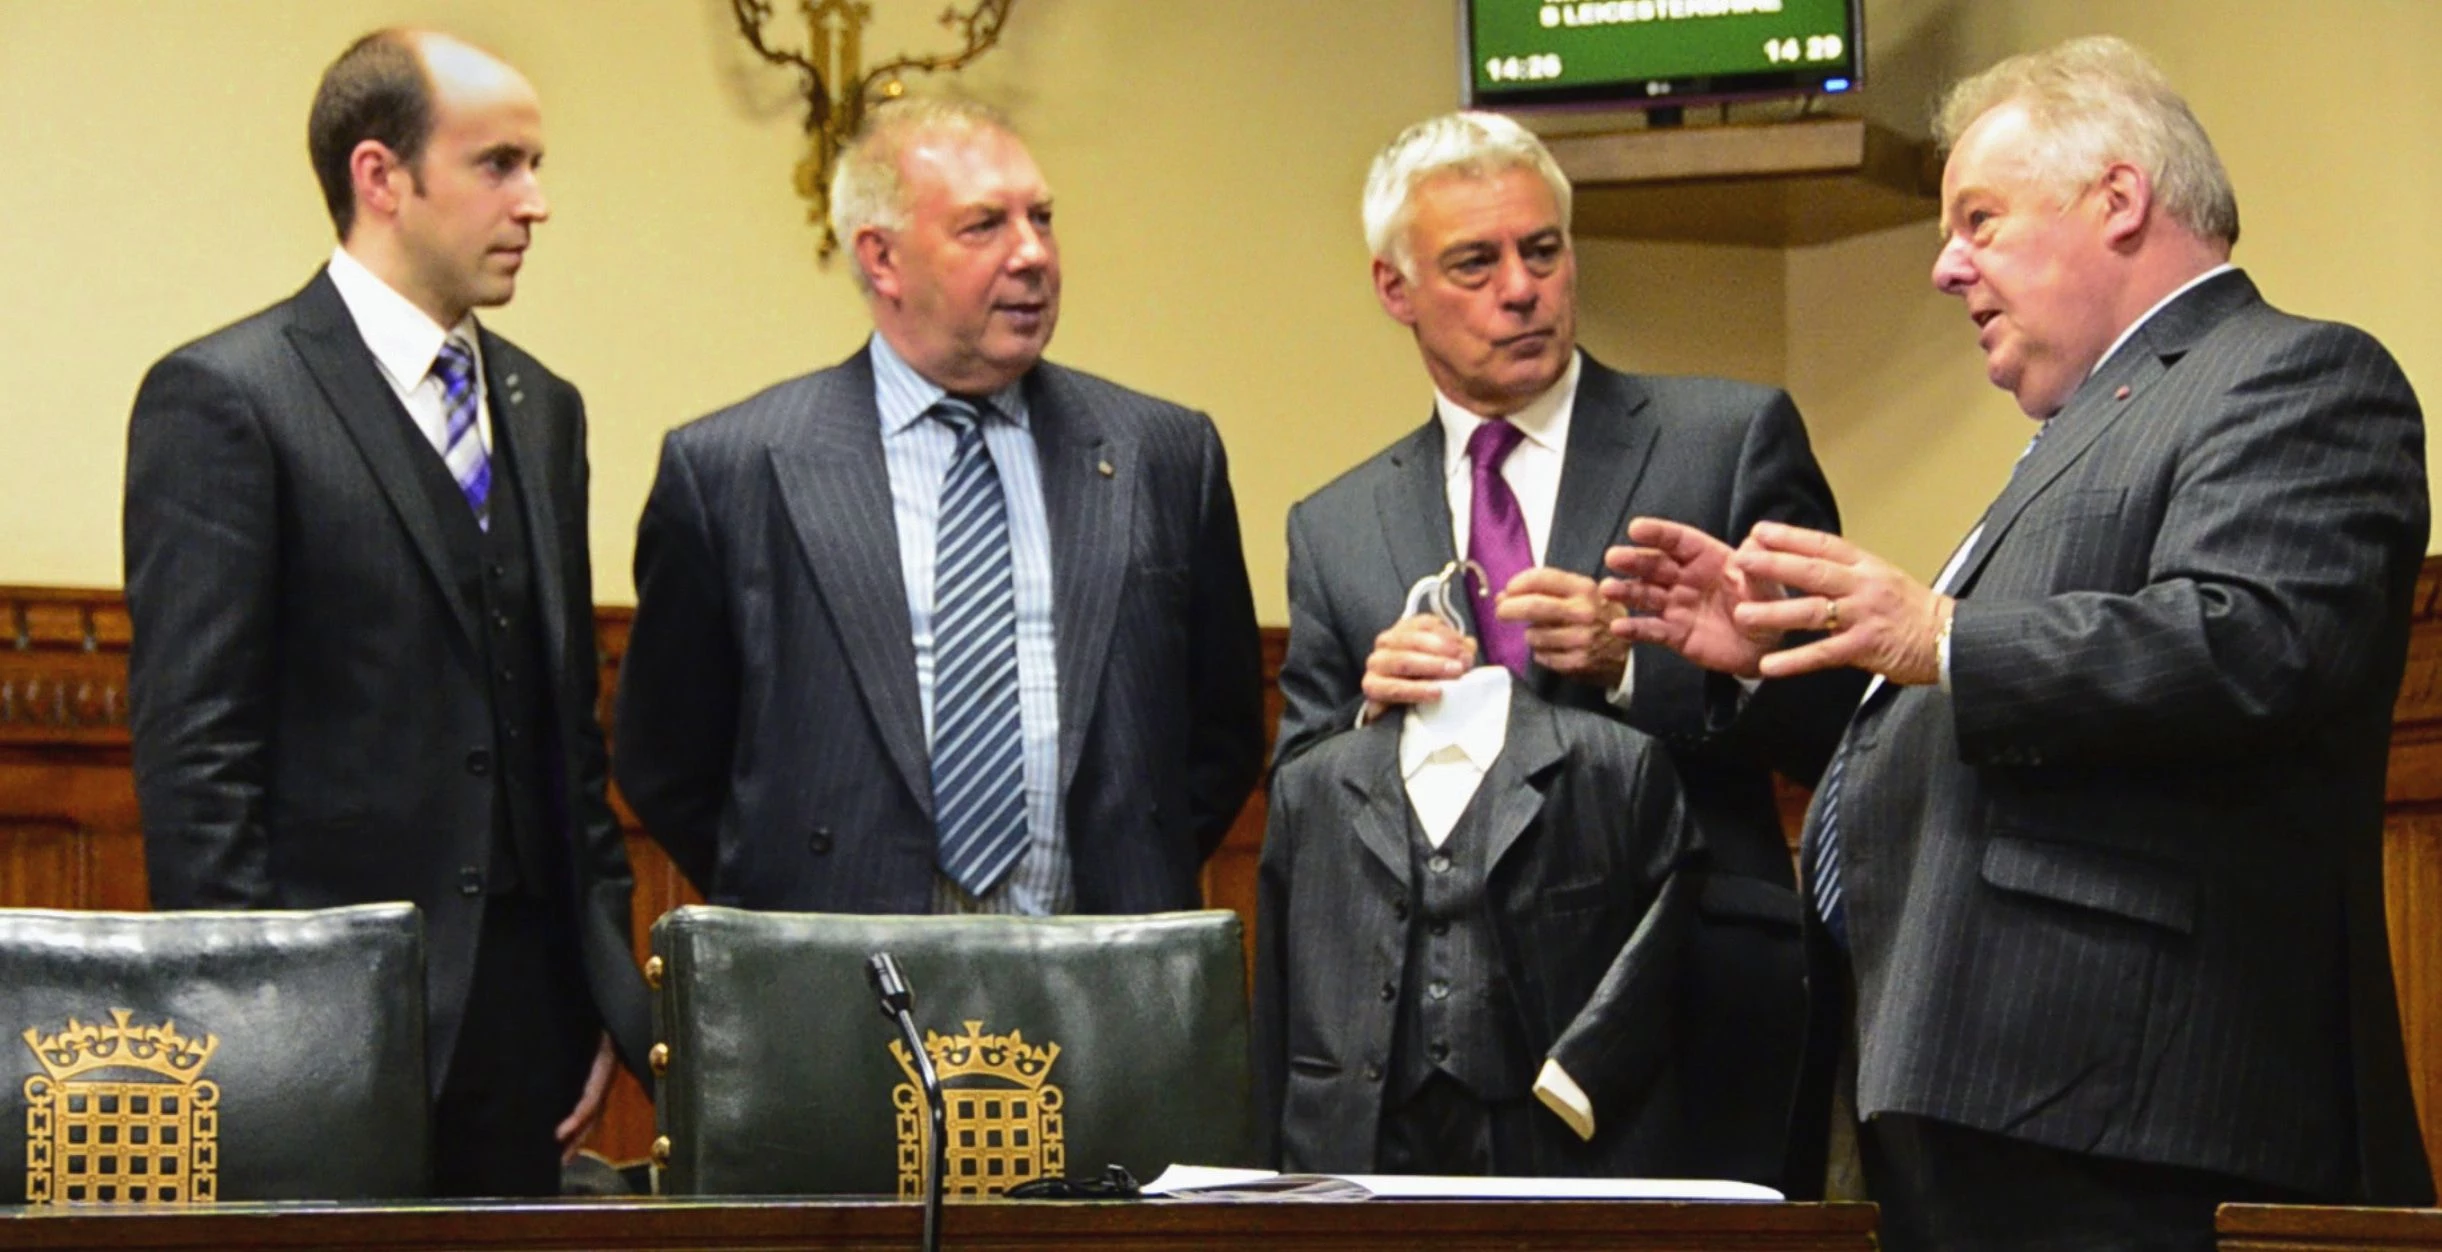 MP, David Ward with Canon Keith Madeley launch the Yorkshire Suit at the House of Commons 